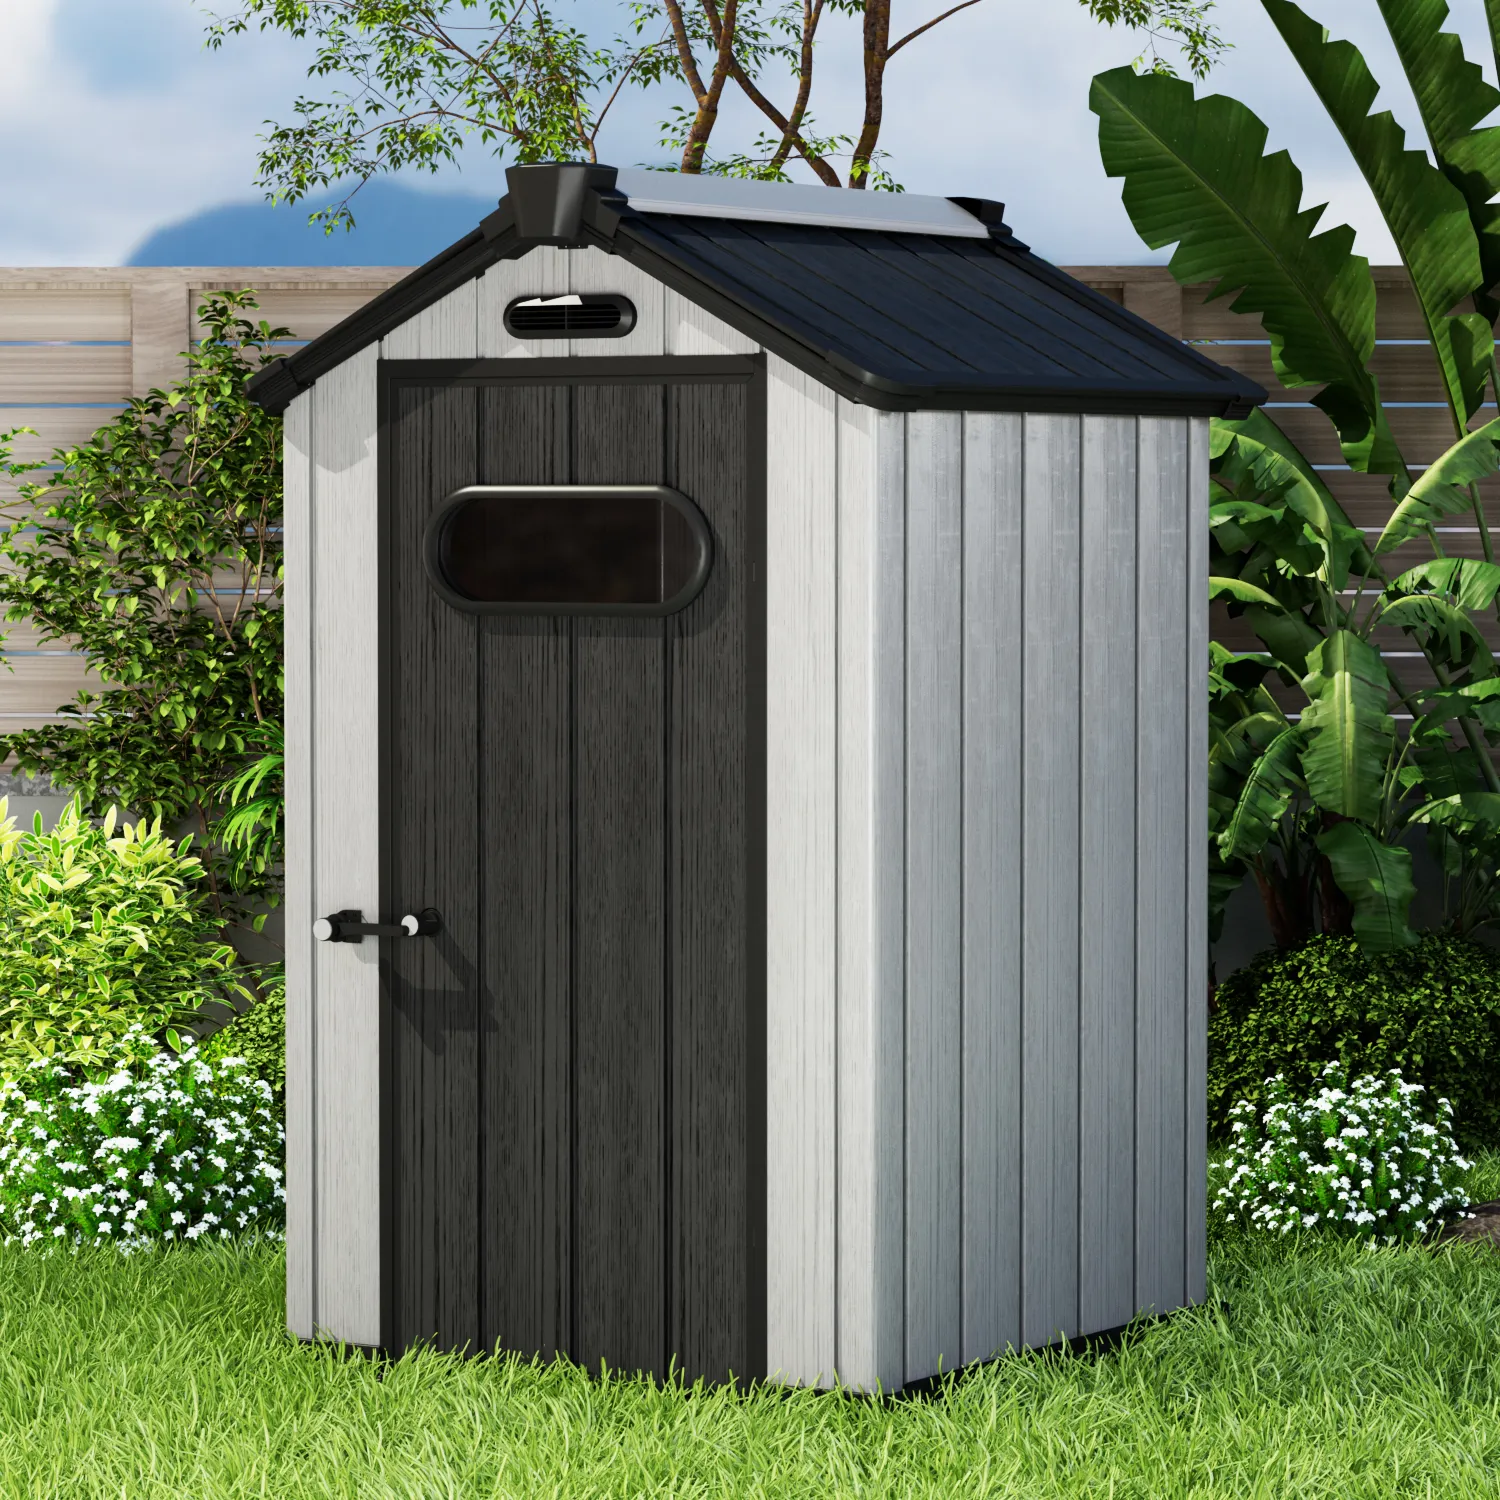 Wholesale high quality waterproof 10x12 garden storage shed outdoor patio tools summer houses with lap siding